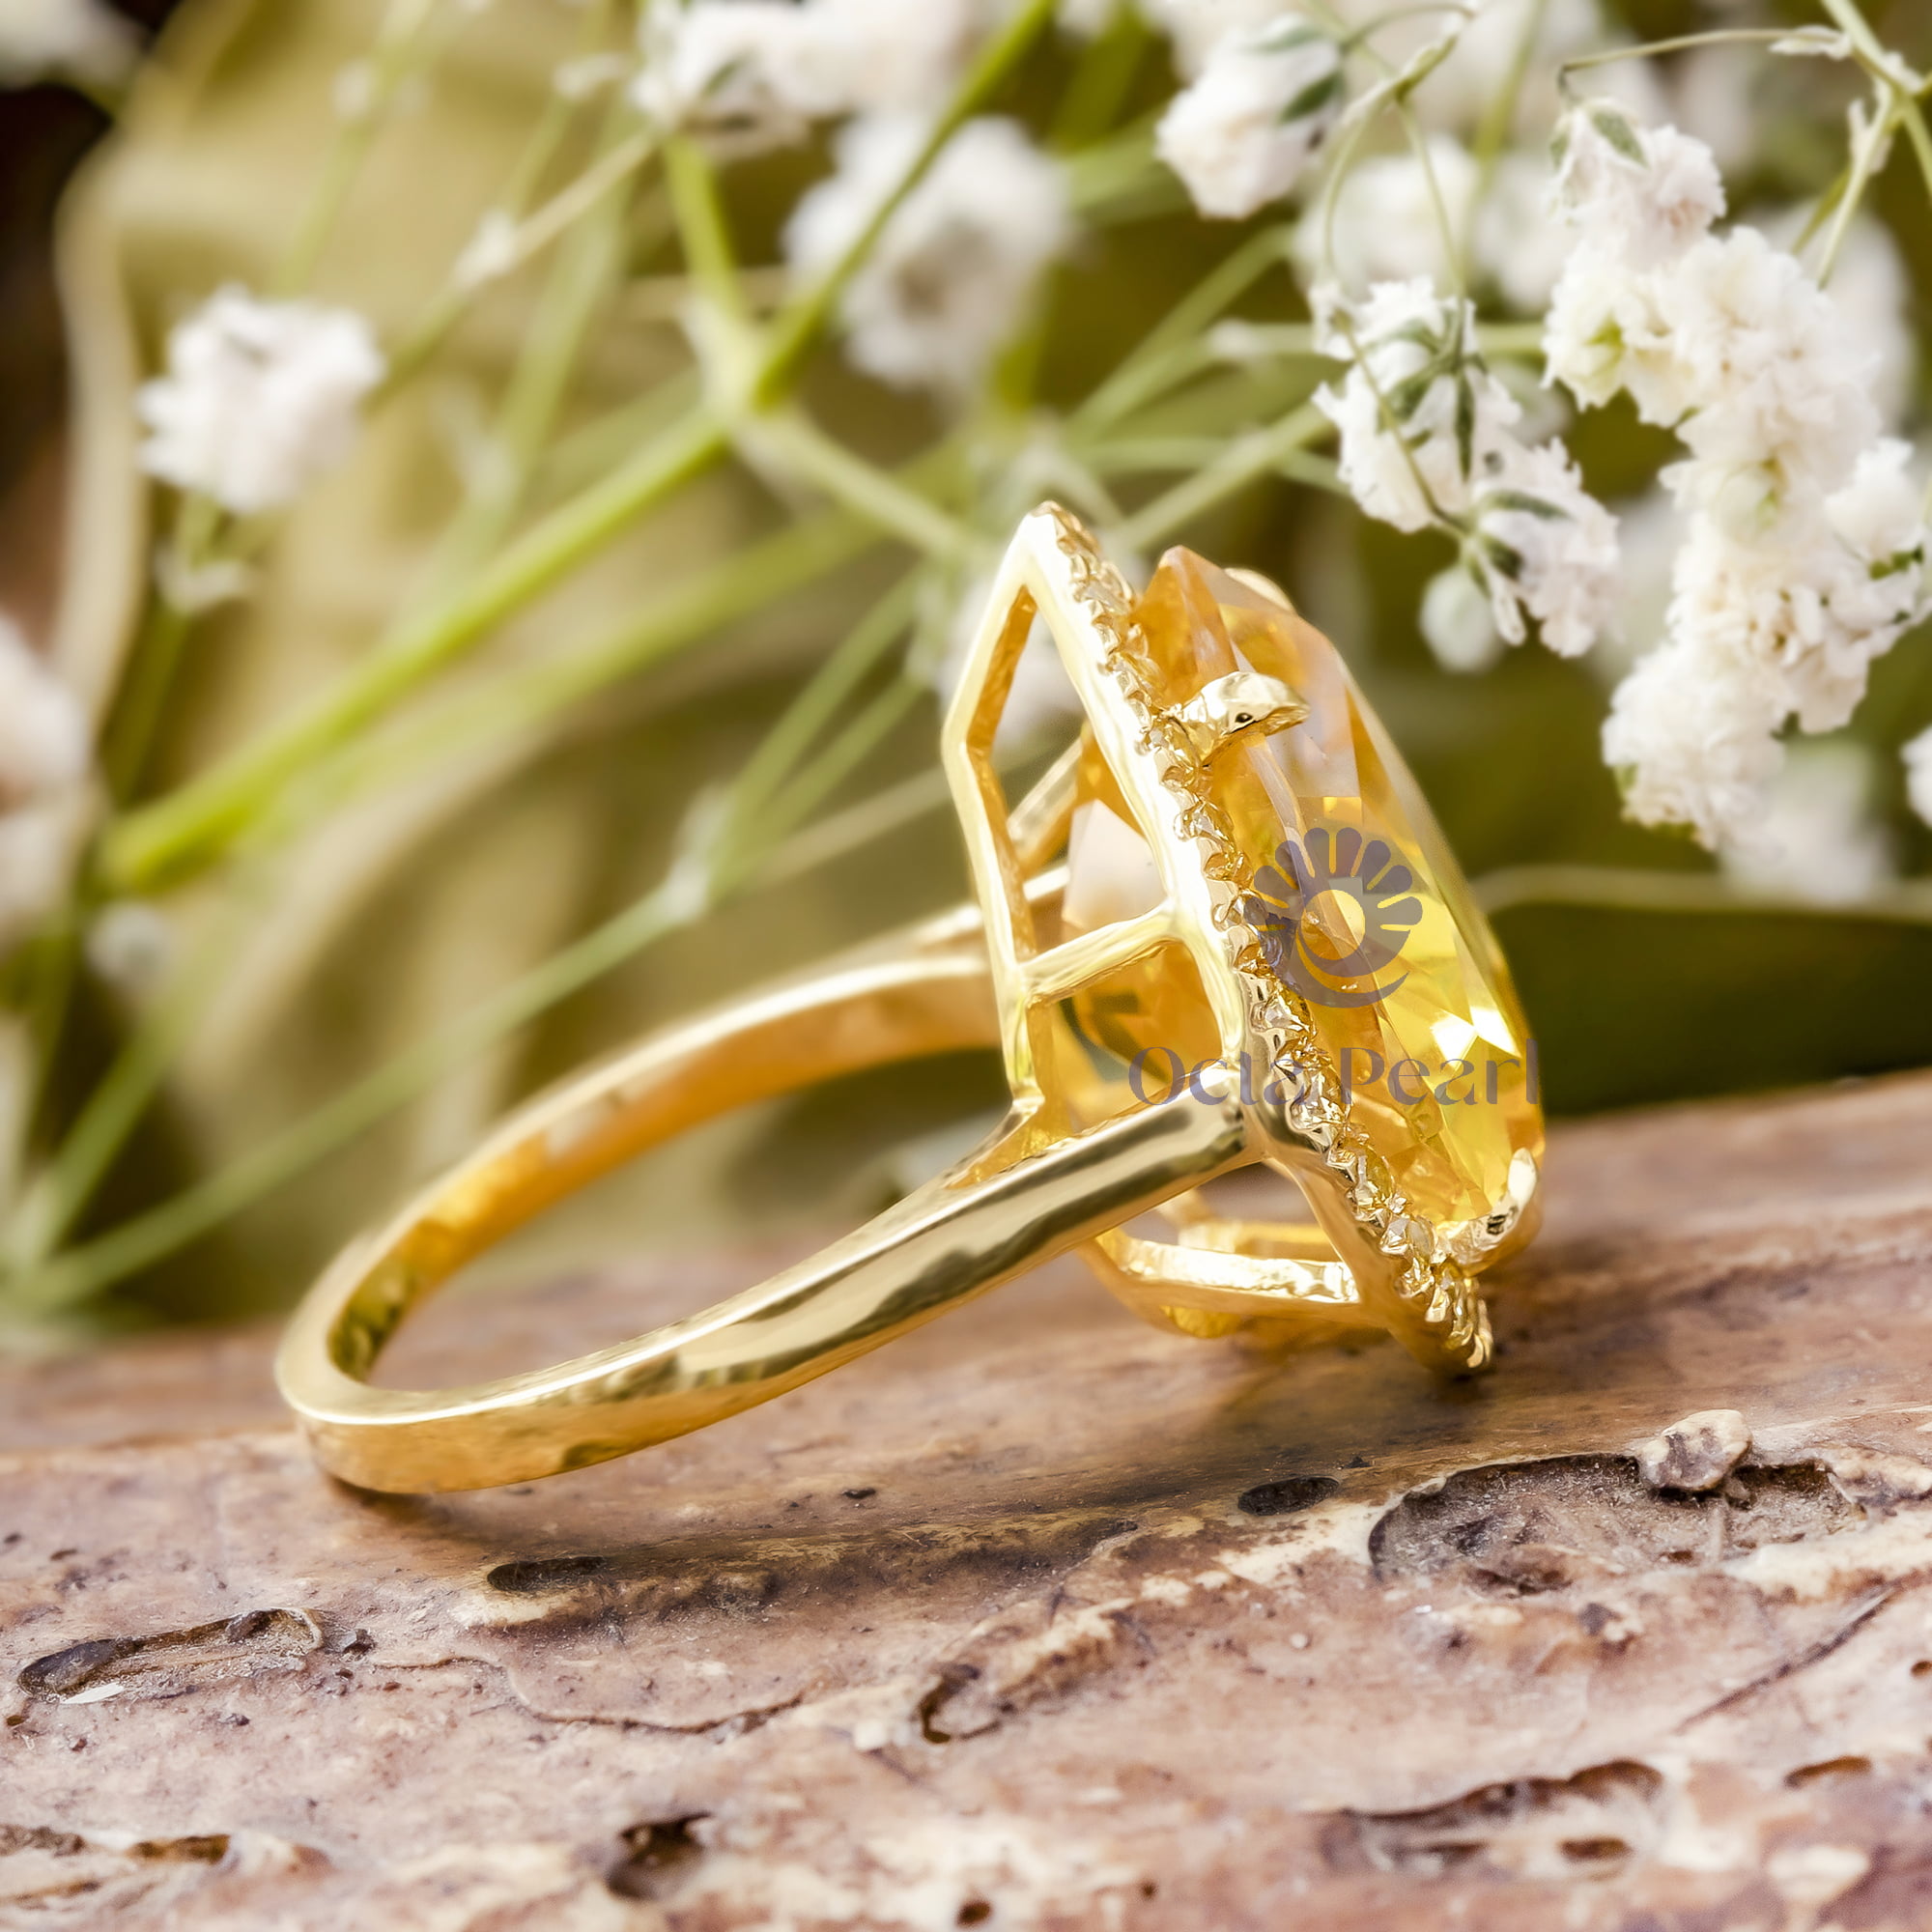 Yellow Heart Cut CZ Stone Halo Party Wear Or Engagement Ring For Women